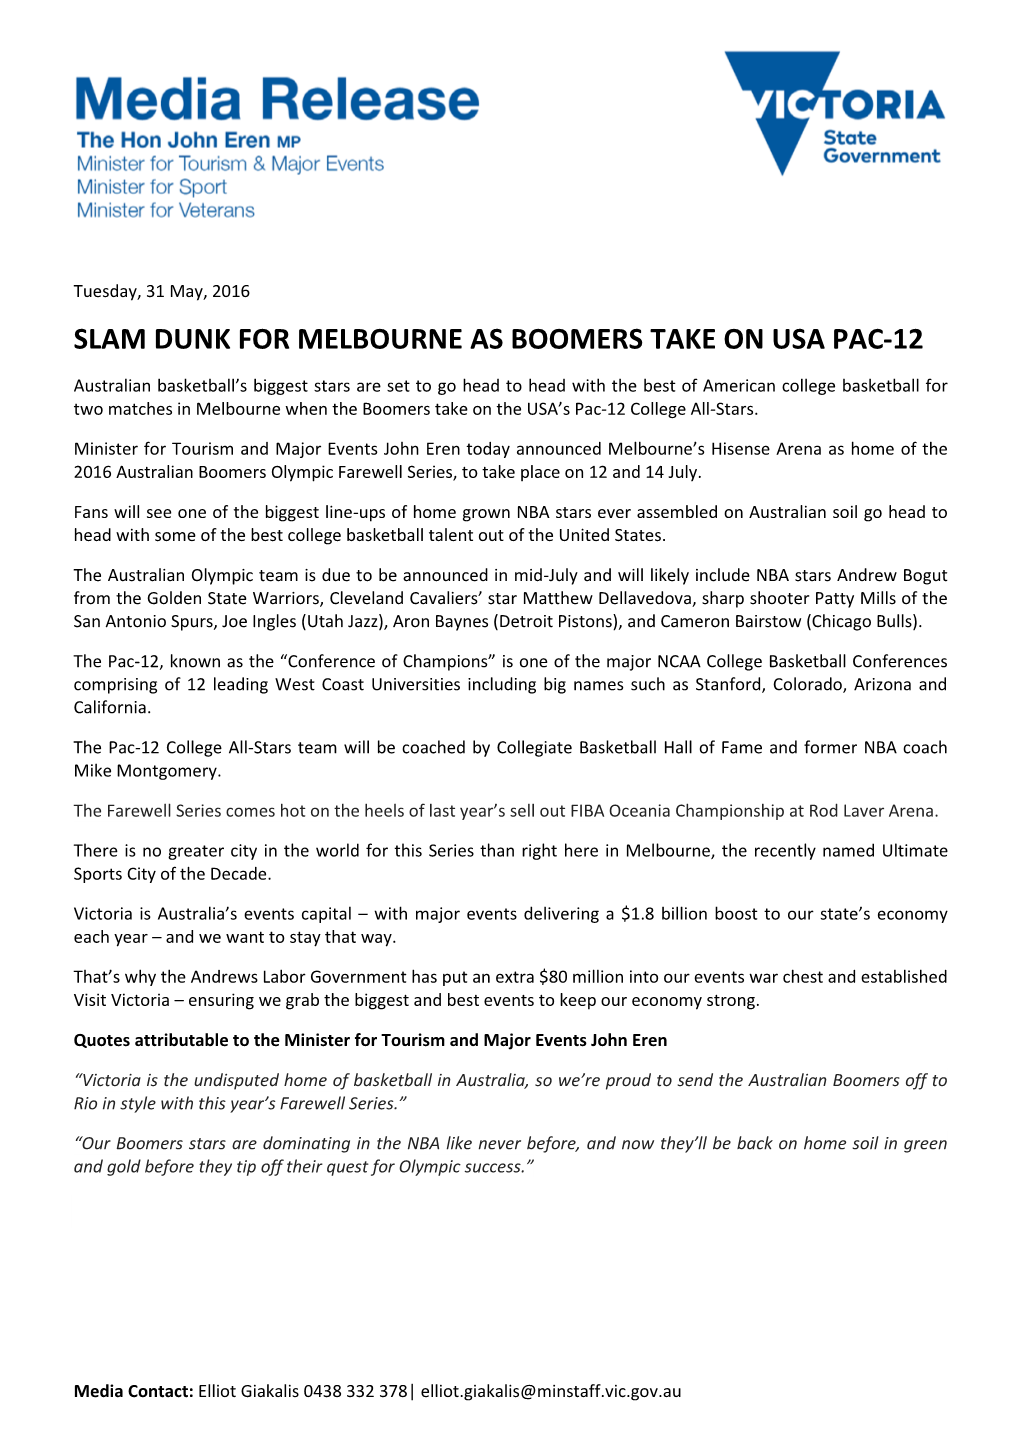 Slam Dunk for Melbourne As Boomers Take on Usa Pac-12